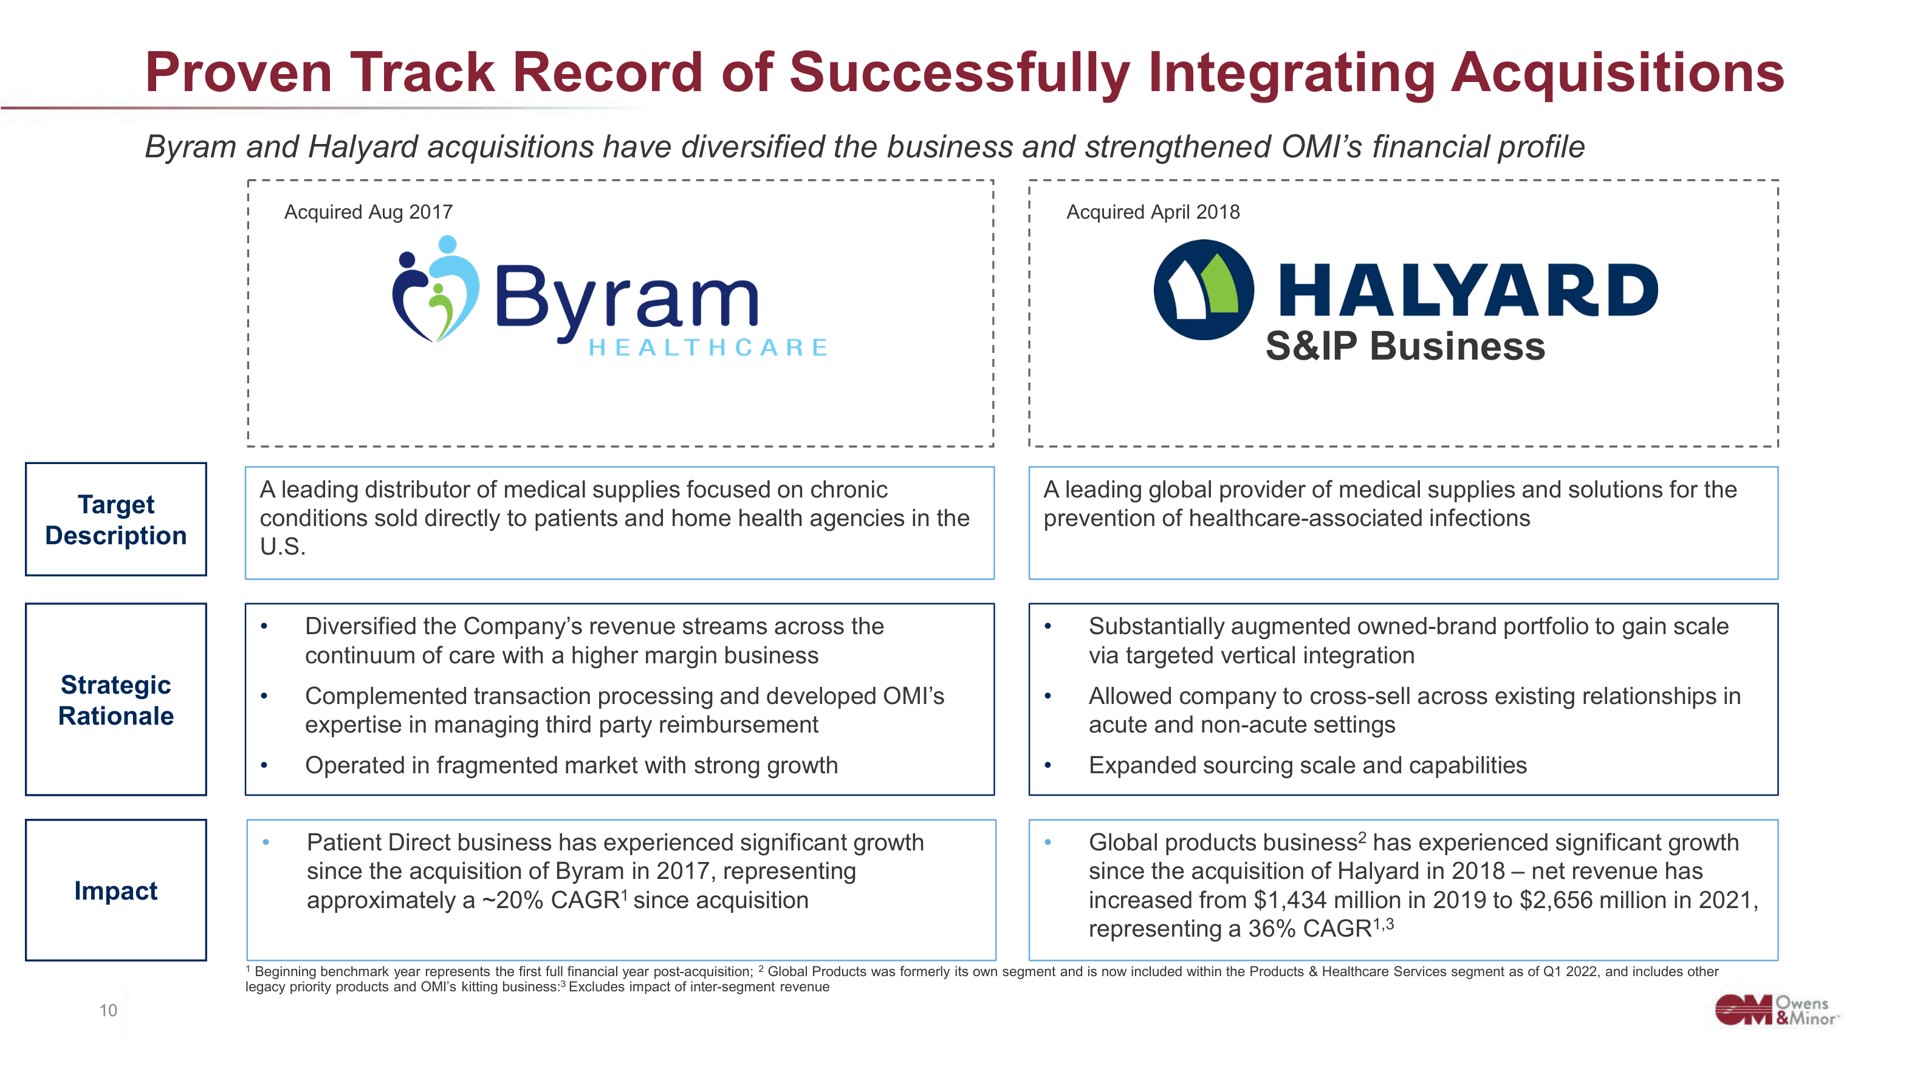 proven track record of successfully integrating acquisitions business halyard | Owens&Minor